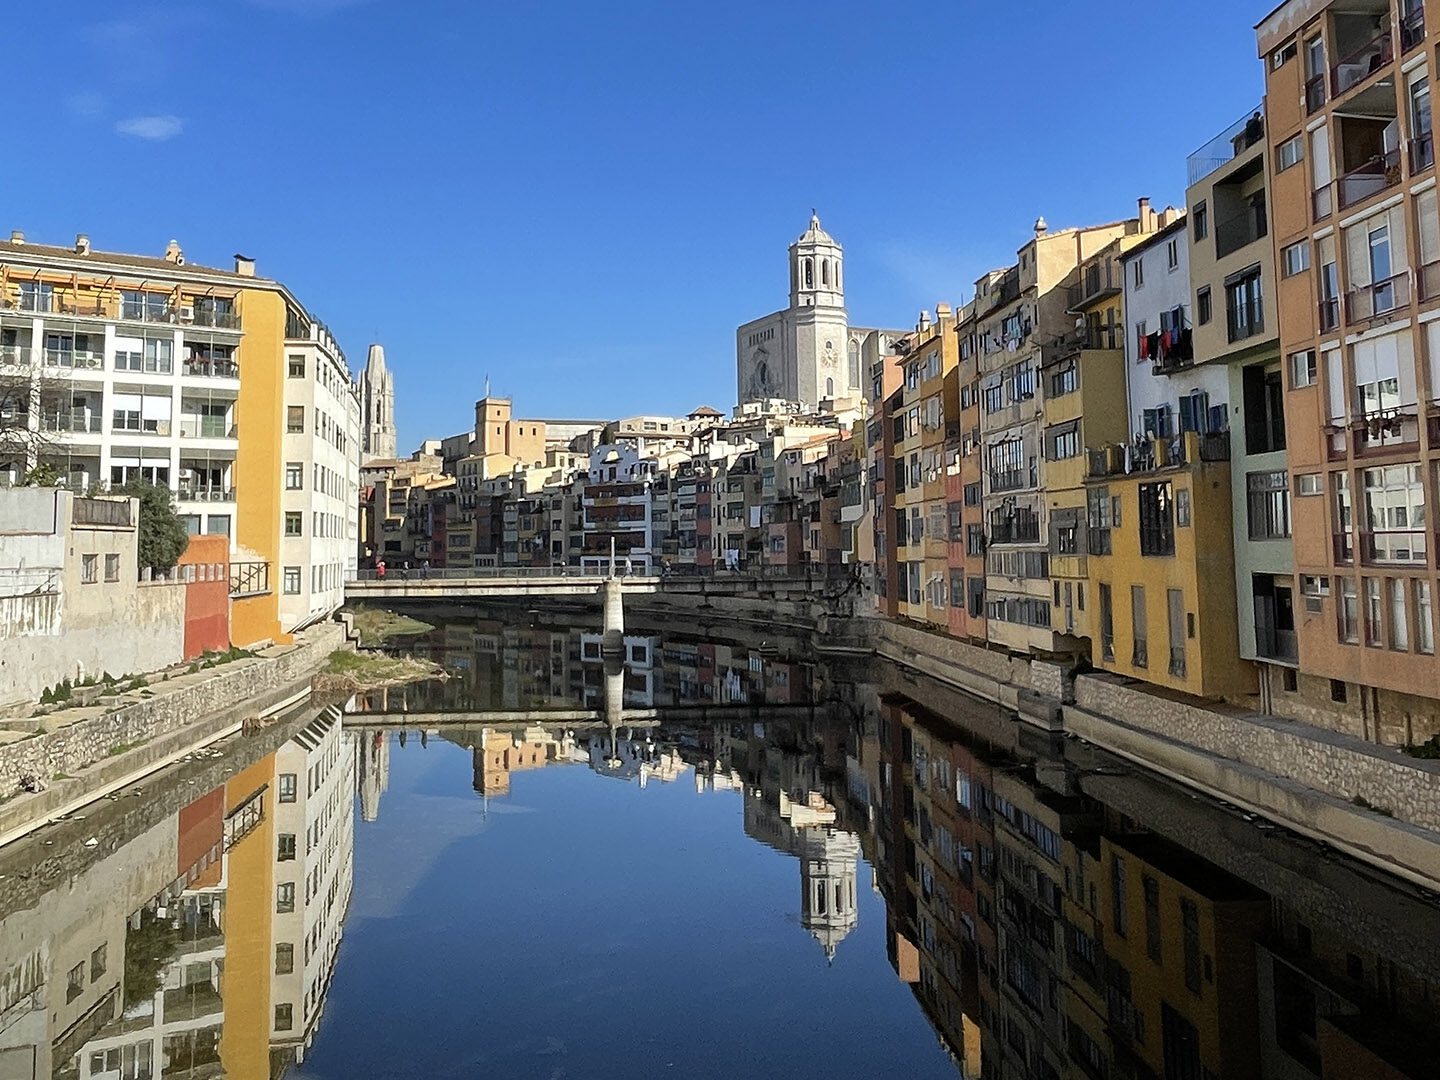 Colorful old buildings lining a river in Girona.